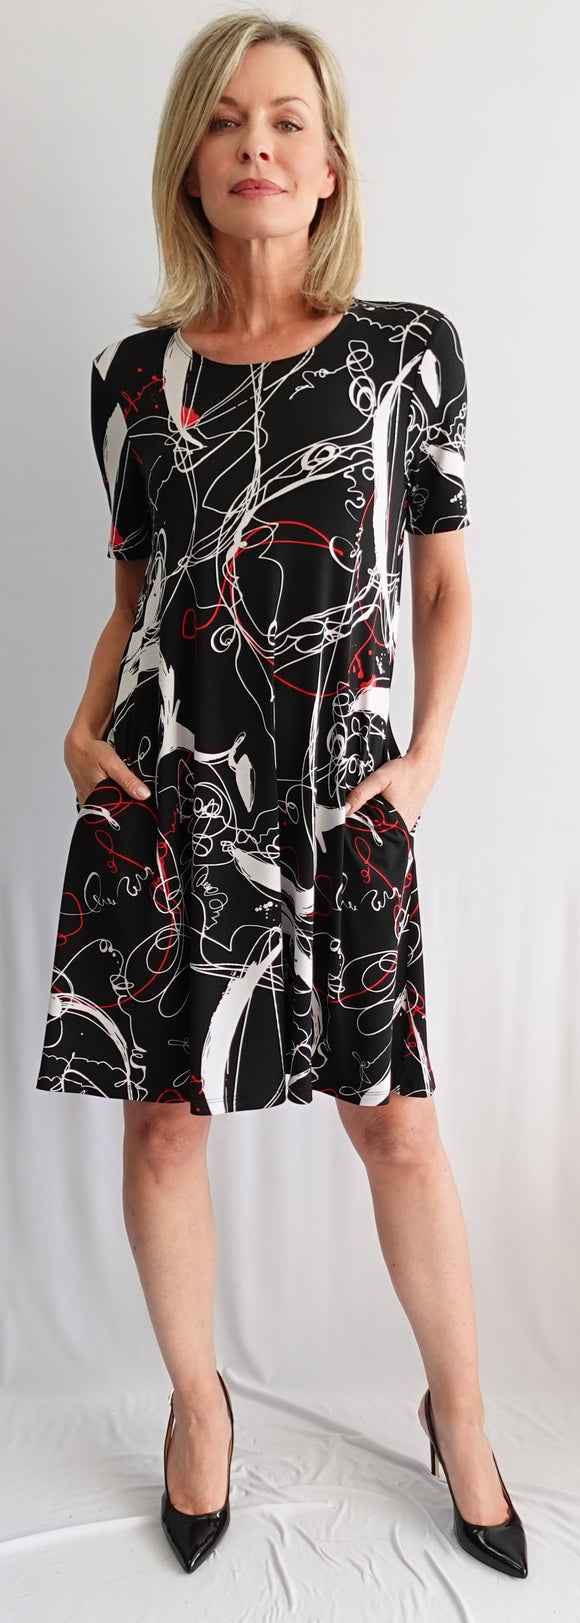 Short-sleeved trapeze dress, with white and red grafitti patterns, by SOFT WORKS #97217